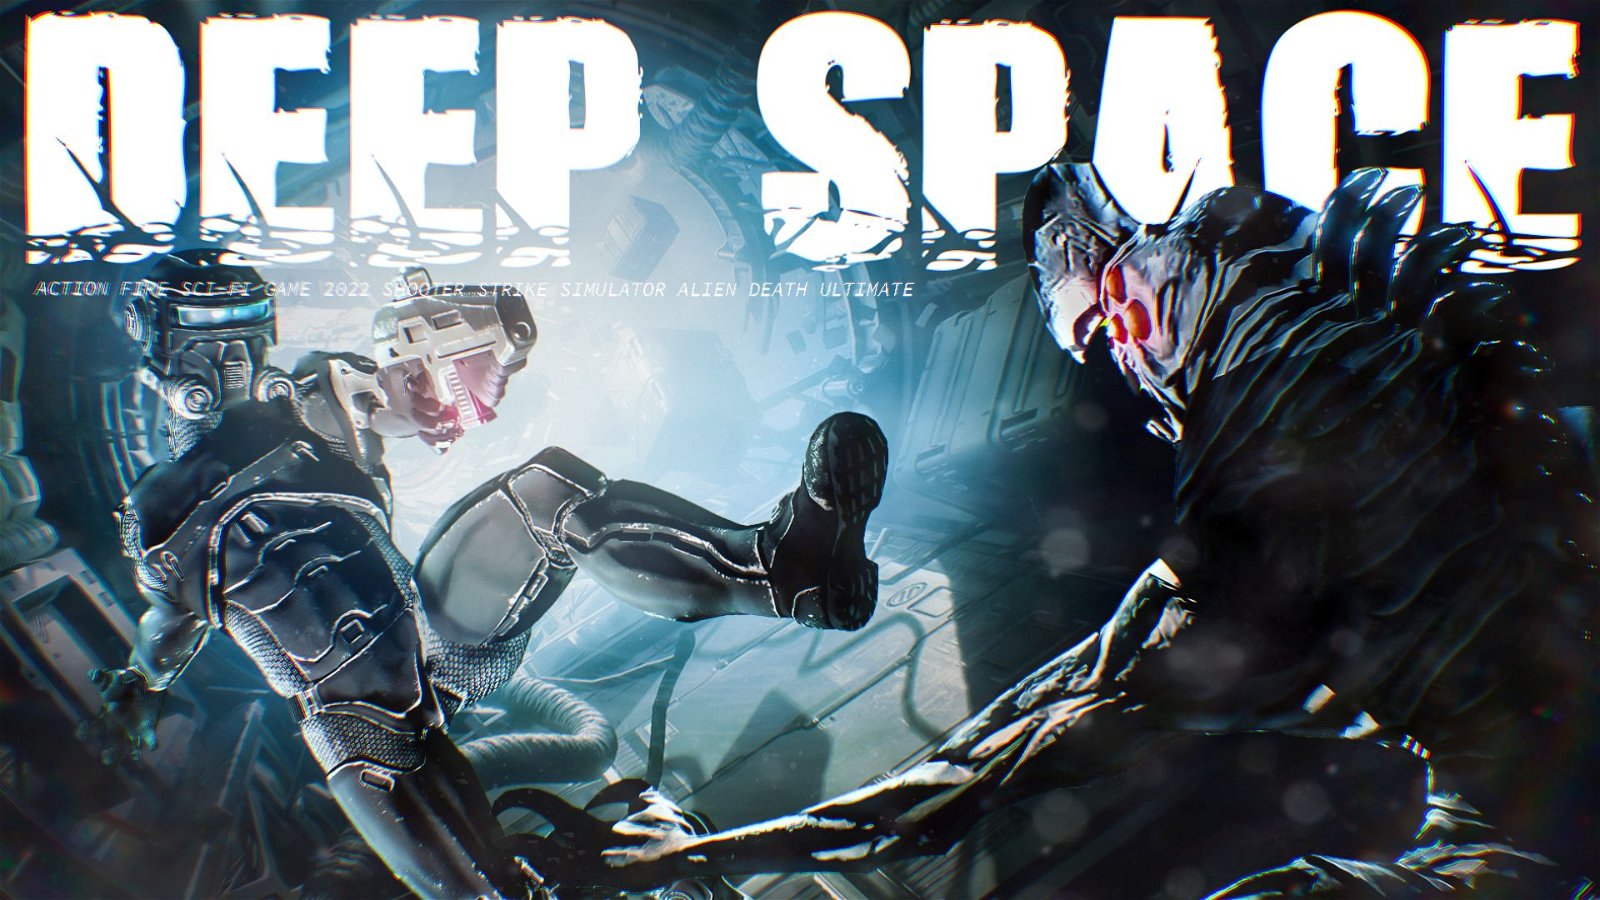 Image of Deep Space:Action Fire Sci-Fi Game 2023 Shooter Strike Simulator Alien Death Ultimate Games